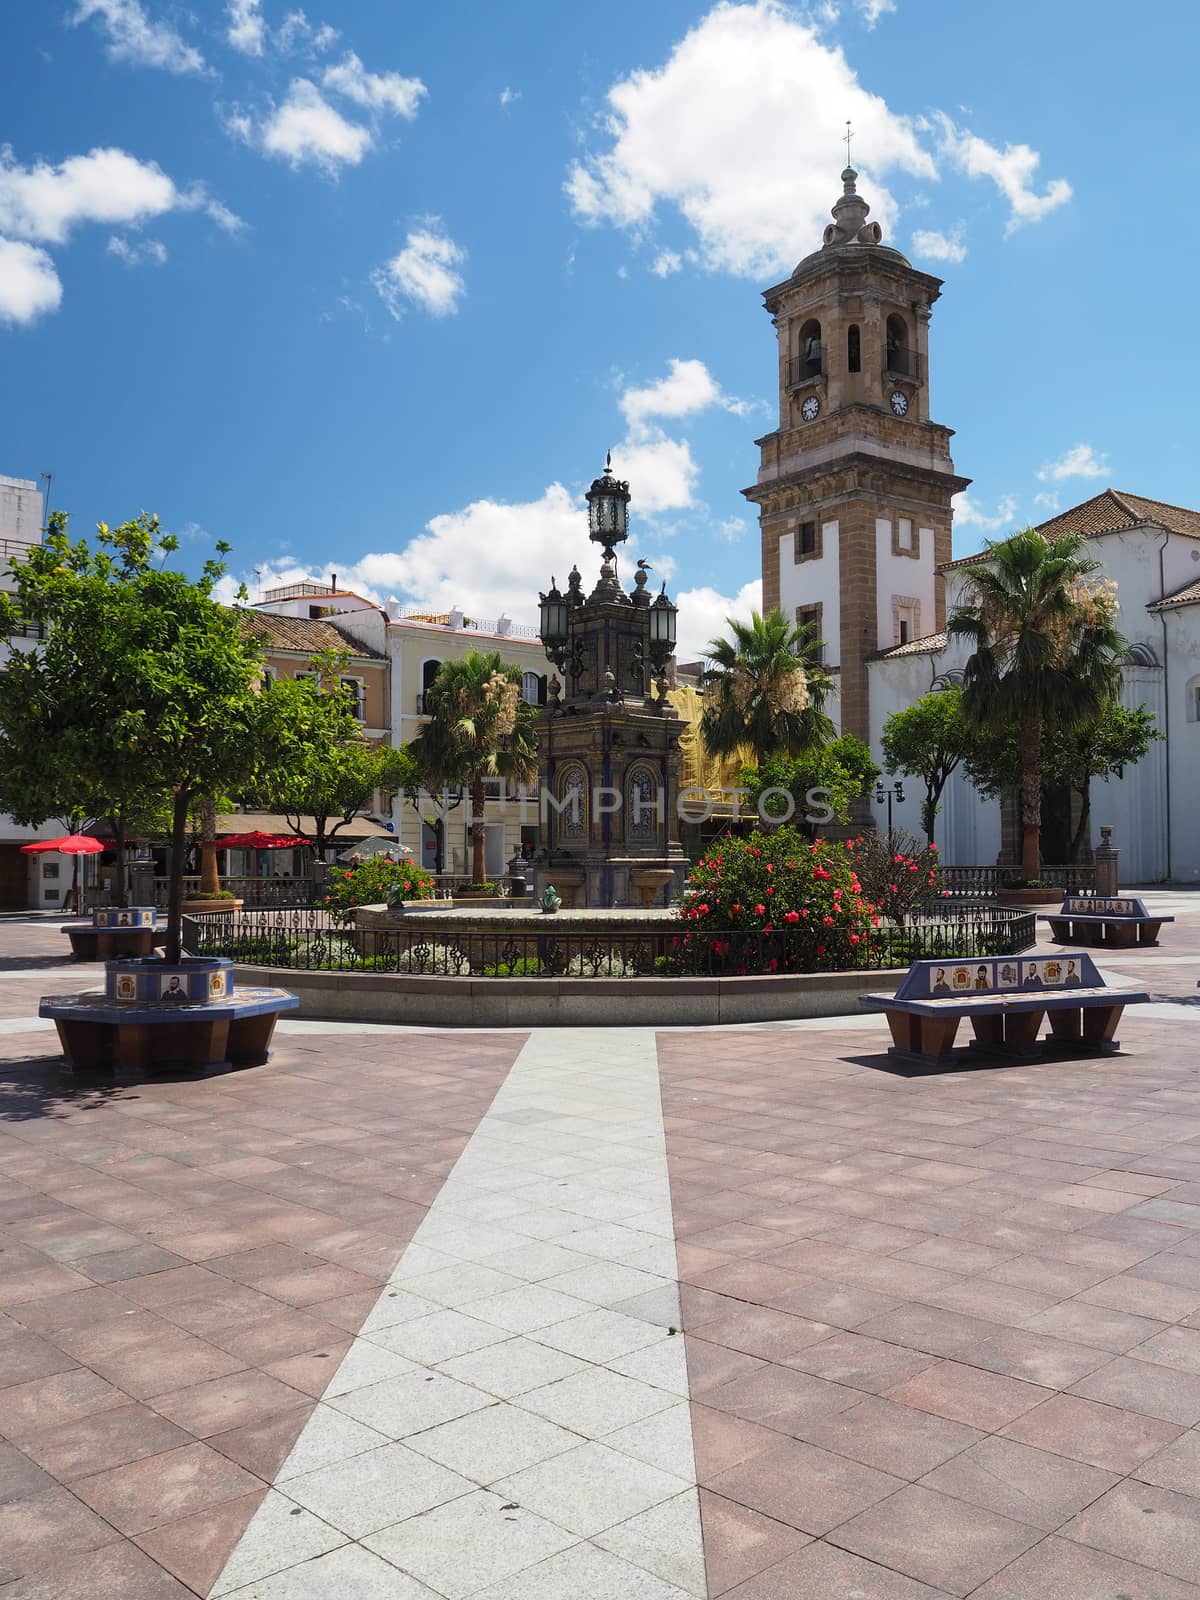 Looking across the Plaza Alta and the colorful tiled fountain and seating to the Iglesia de Nuestra Senora de la Palma, or The Church of Our Lady of the Palm, Algeciras, Andalucia, Spain